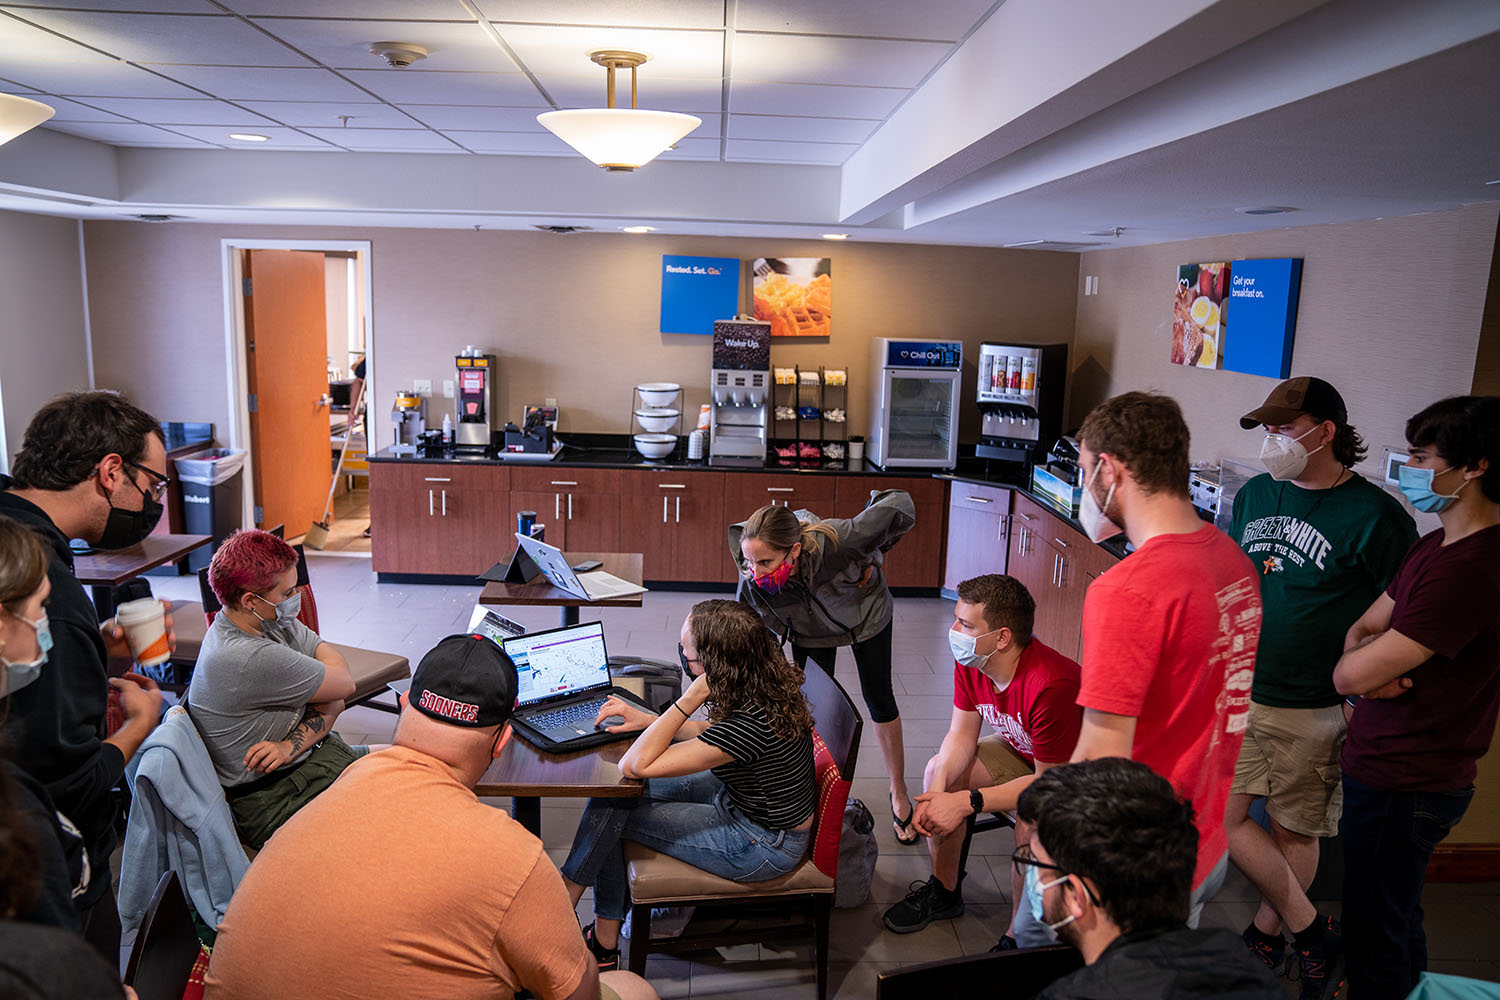 Every morning, the group would congregate in the hotel together to have weather briefings. During these meetings, they would determine locations to travel to for the day, by looking at updated weather mapping and storm data.